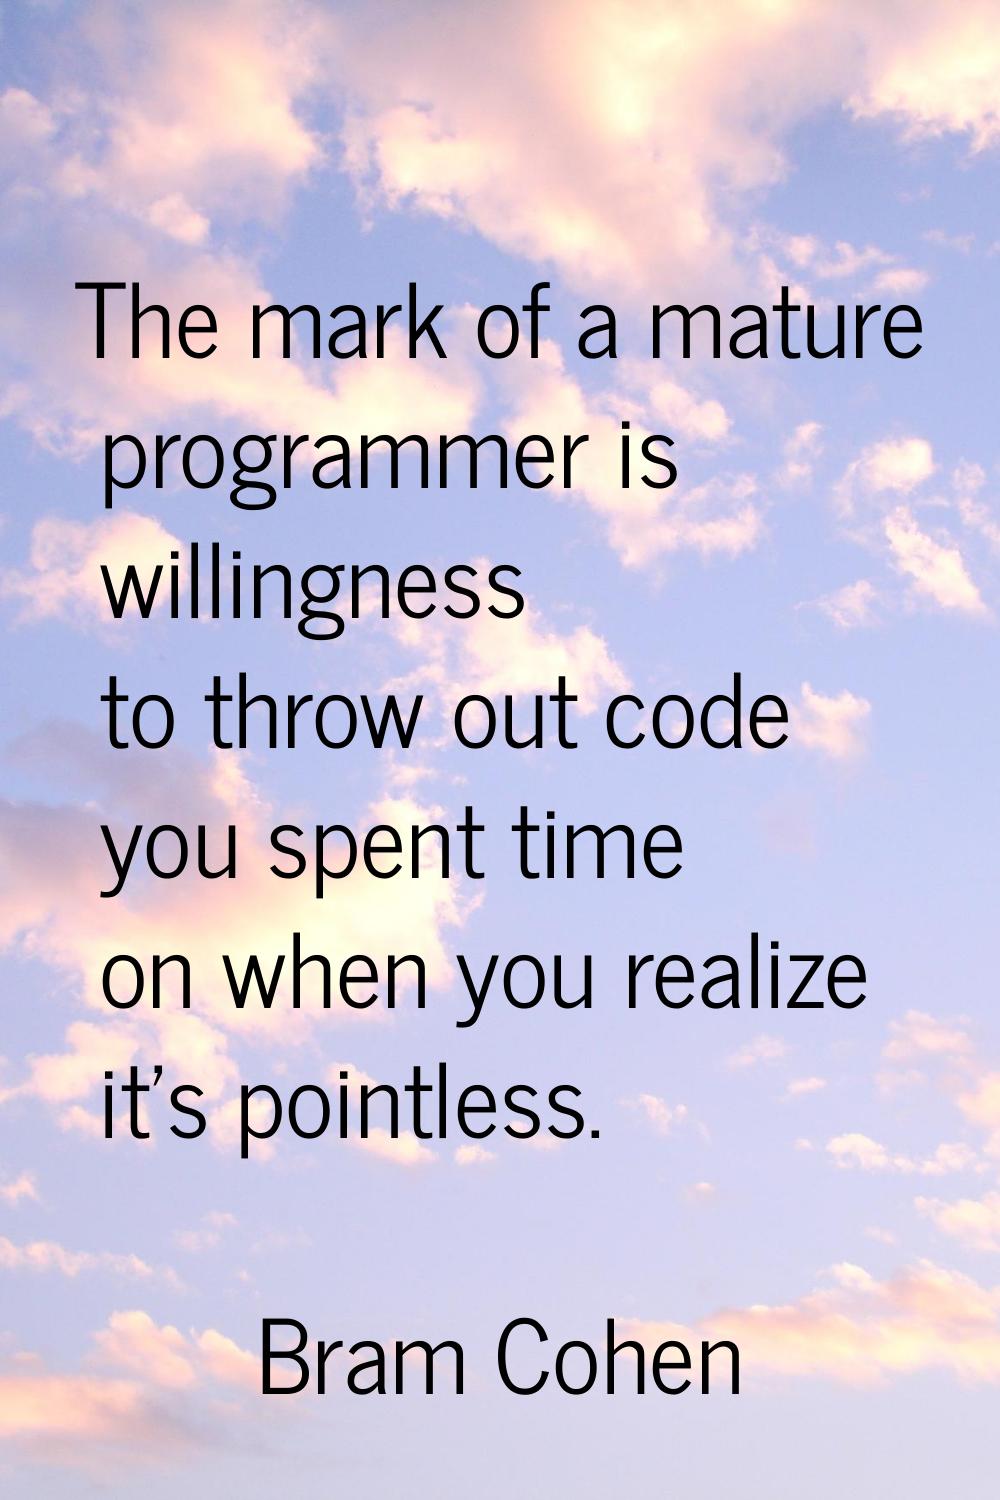 The mark of a mature programmer is willingness to throw out code you spent time on when you realize